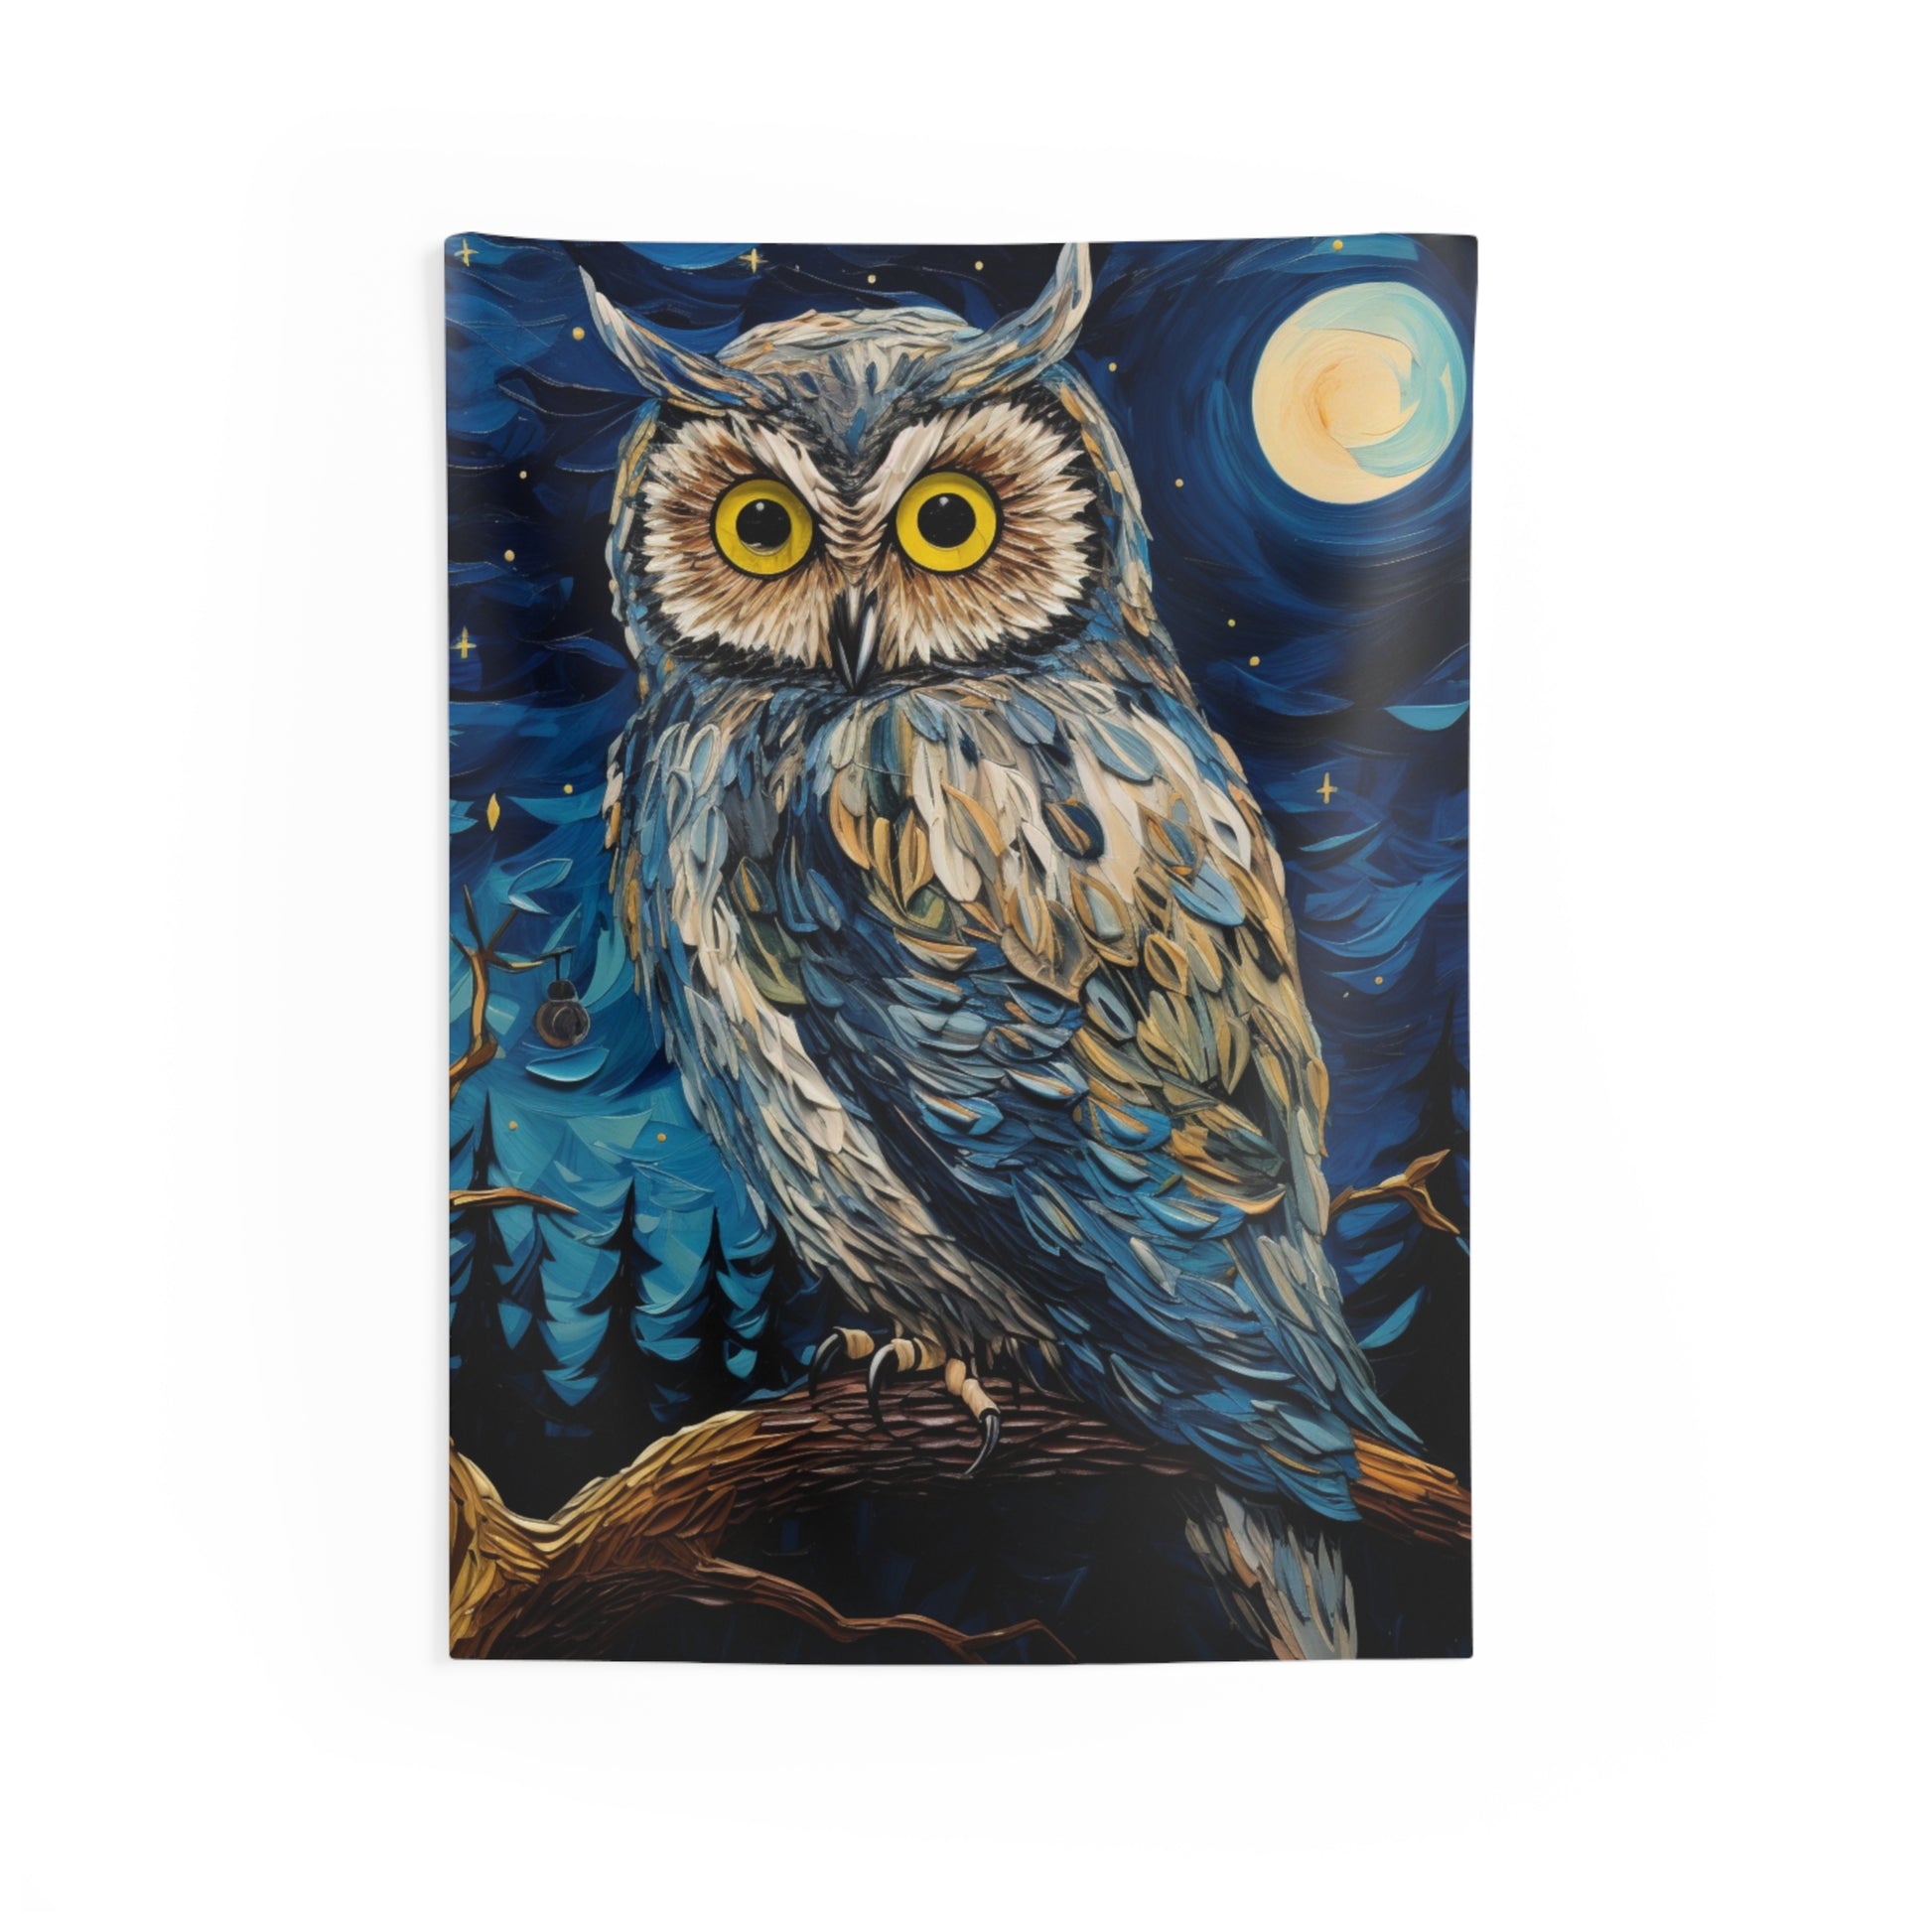 Owl Tapestry, Printed Painting Animal Bird Wall Art Hanging Cool Unique Vertical Aesthetic Large Small Decor Bedroom College Dorm Room Starcove Fashion